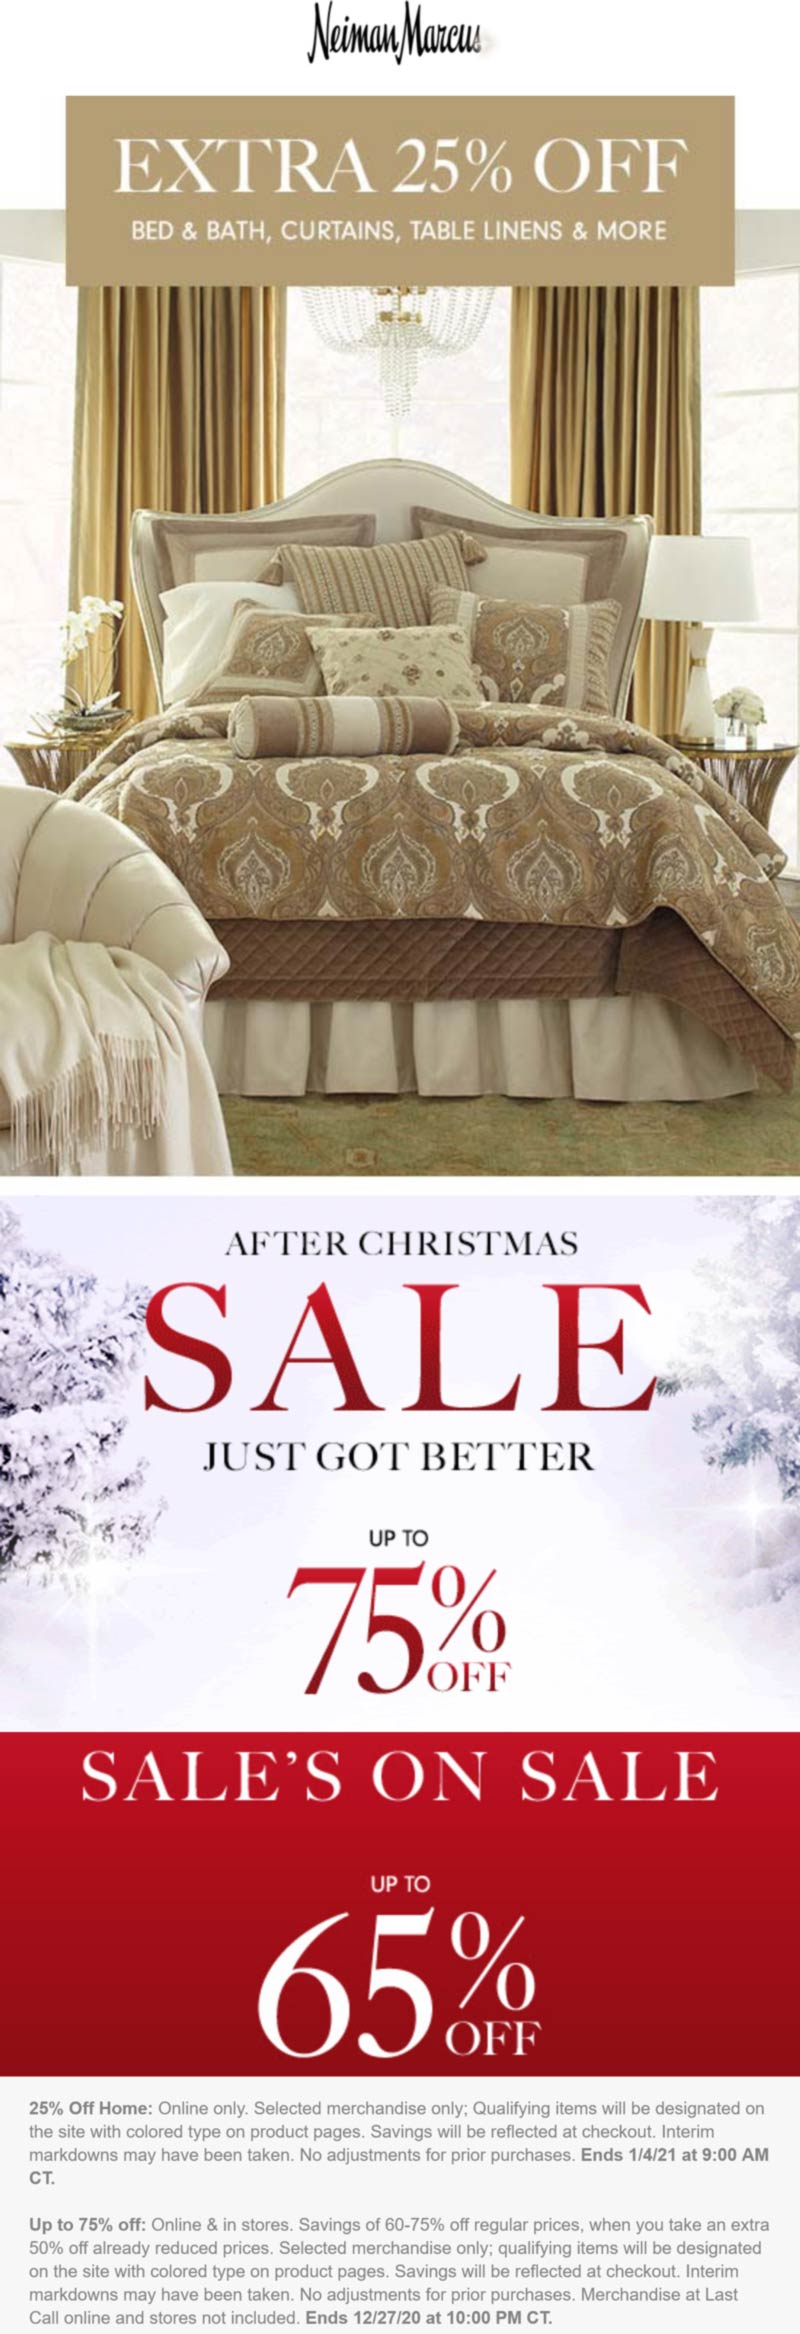 Neiman Marcus stores Coupon  Extra 25% off home & more at Neiman Marcus #neimanmarcus 